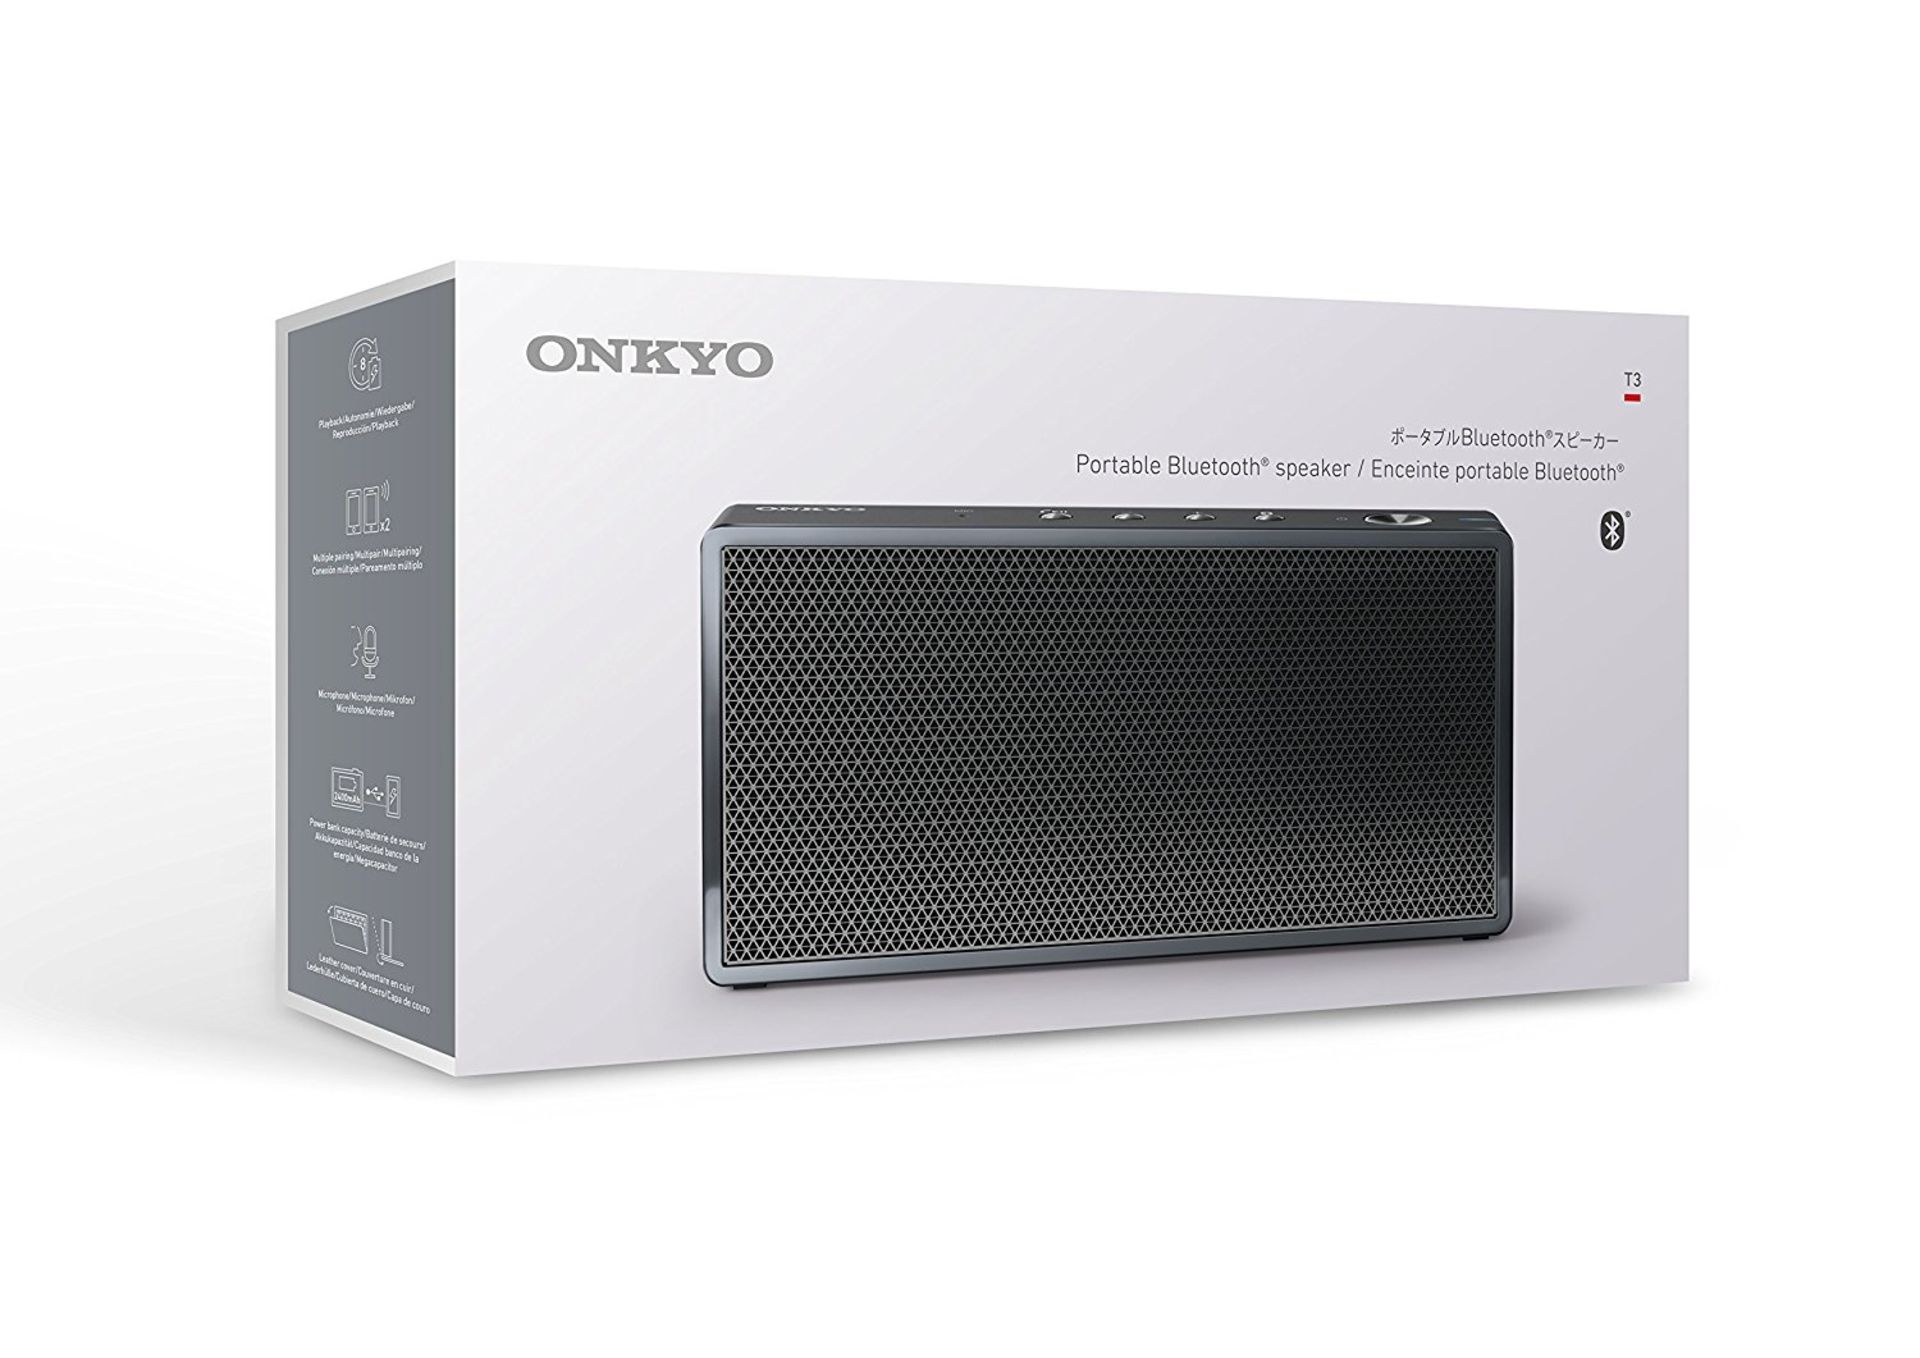 V Brand New Onkyo T3 Lightweight Portable Bluetooth Speaker with USB output for Charging Devices - 8 - Bild 3 aus 4